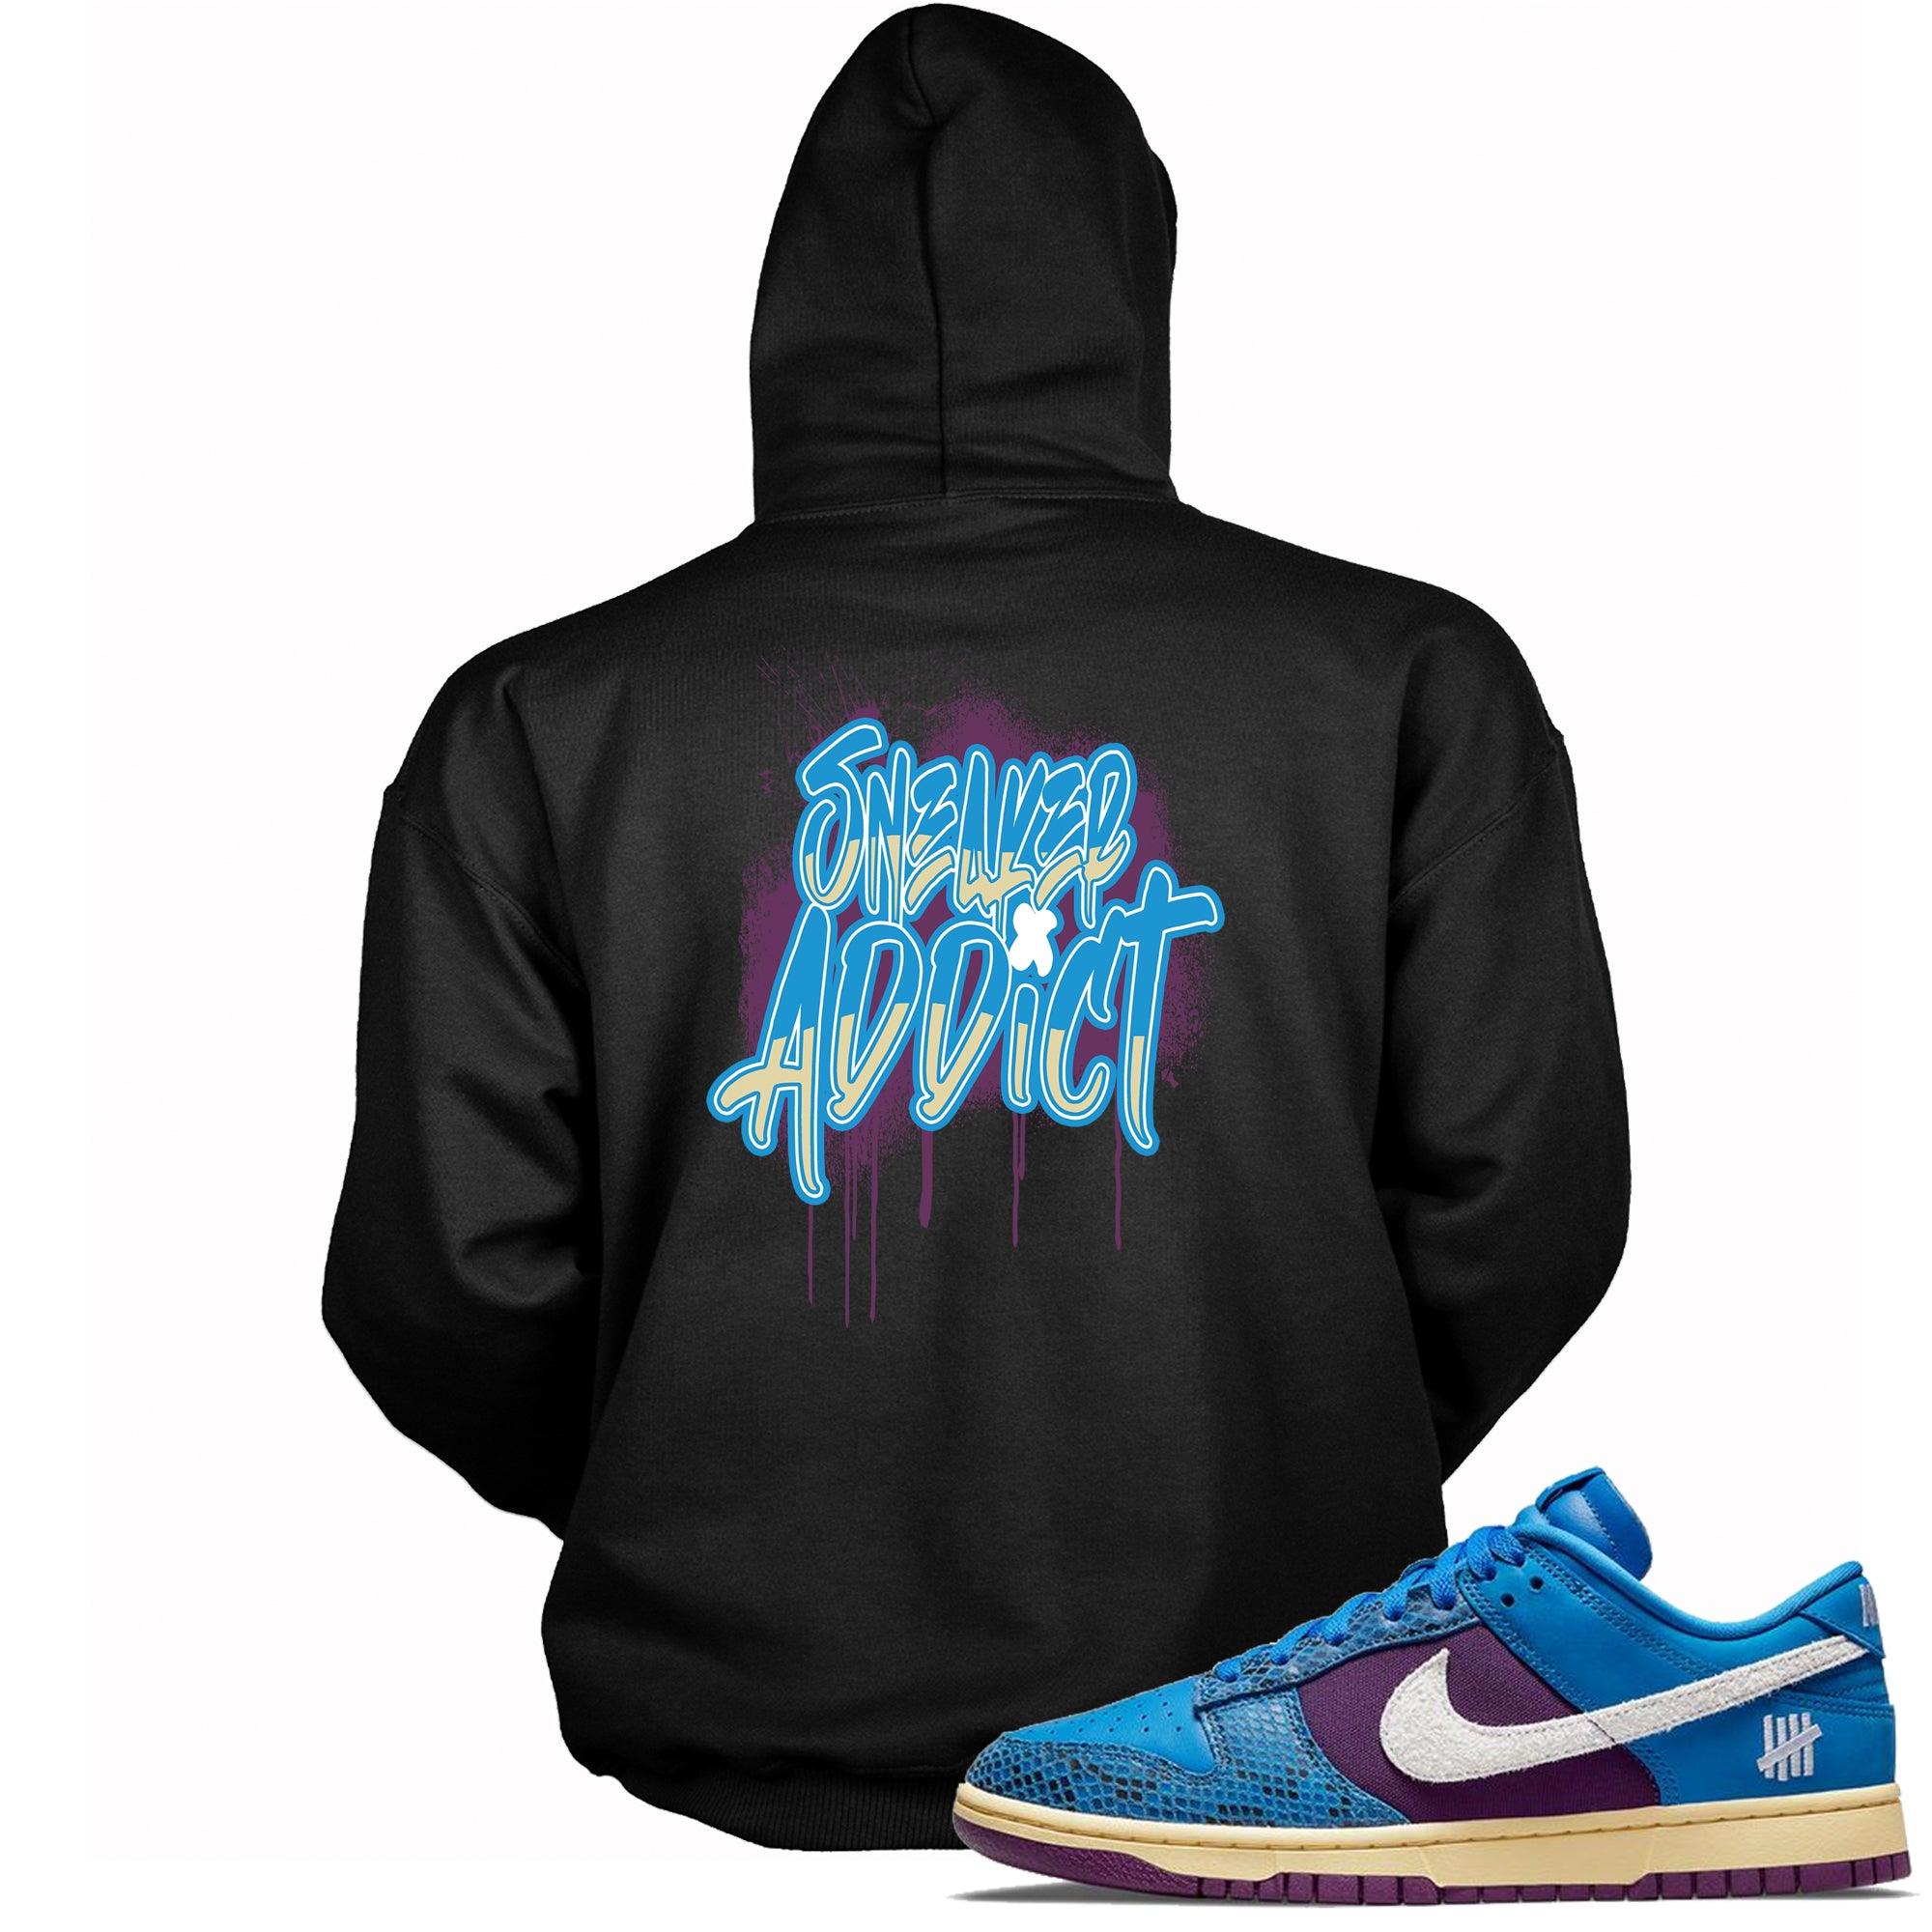 Sneaker Addict Sweatshirt Nike Dunks Low Undefeated 5 On It Dunk vs AF1 photo